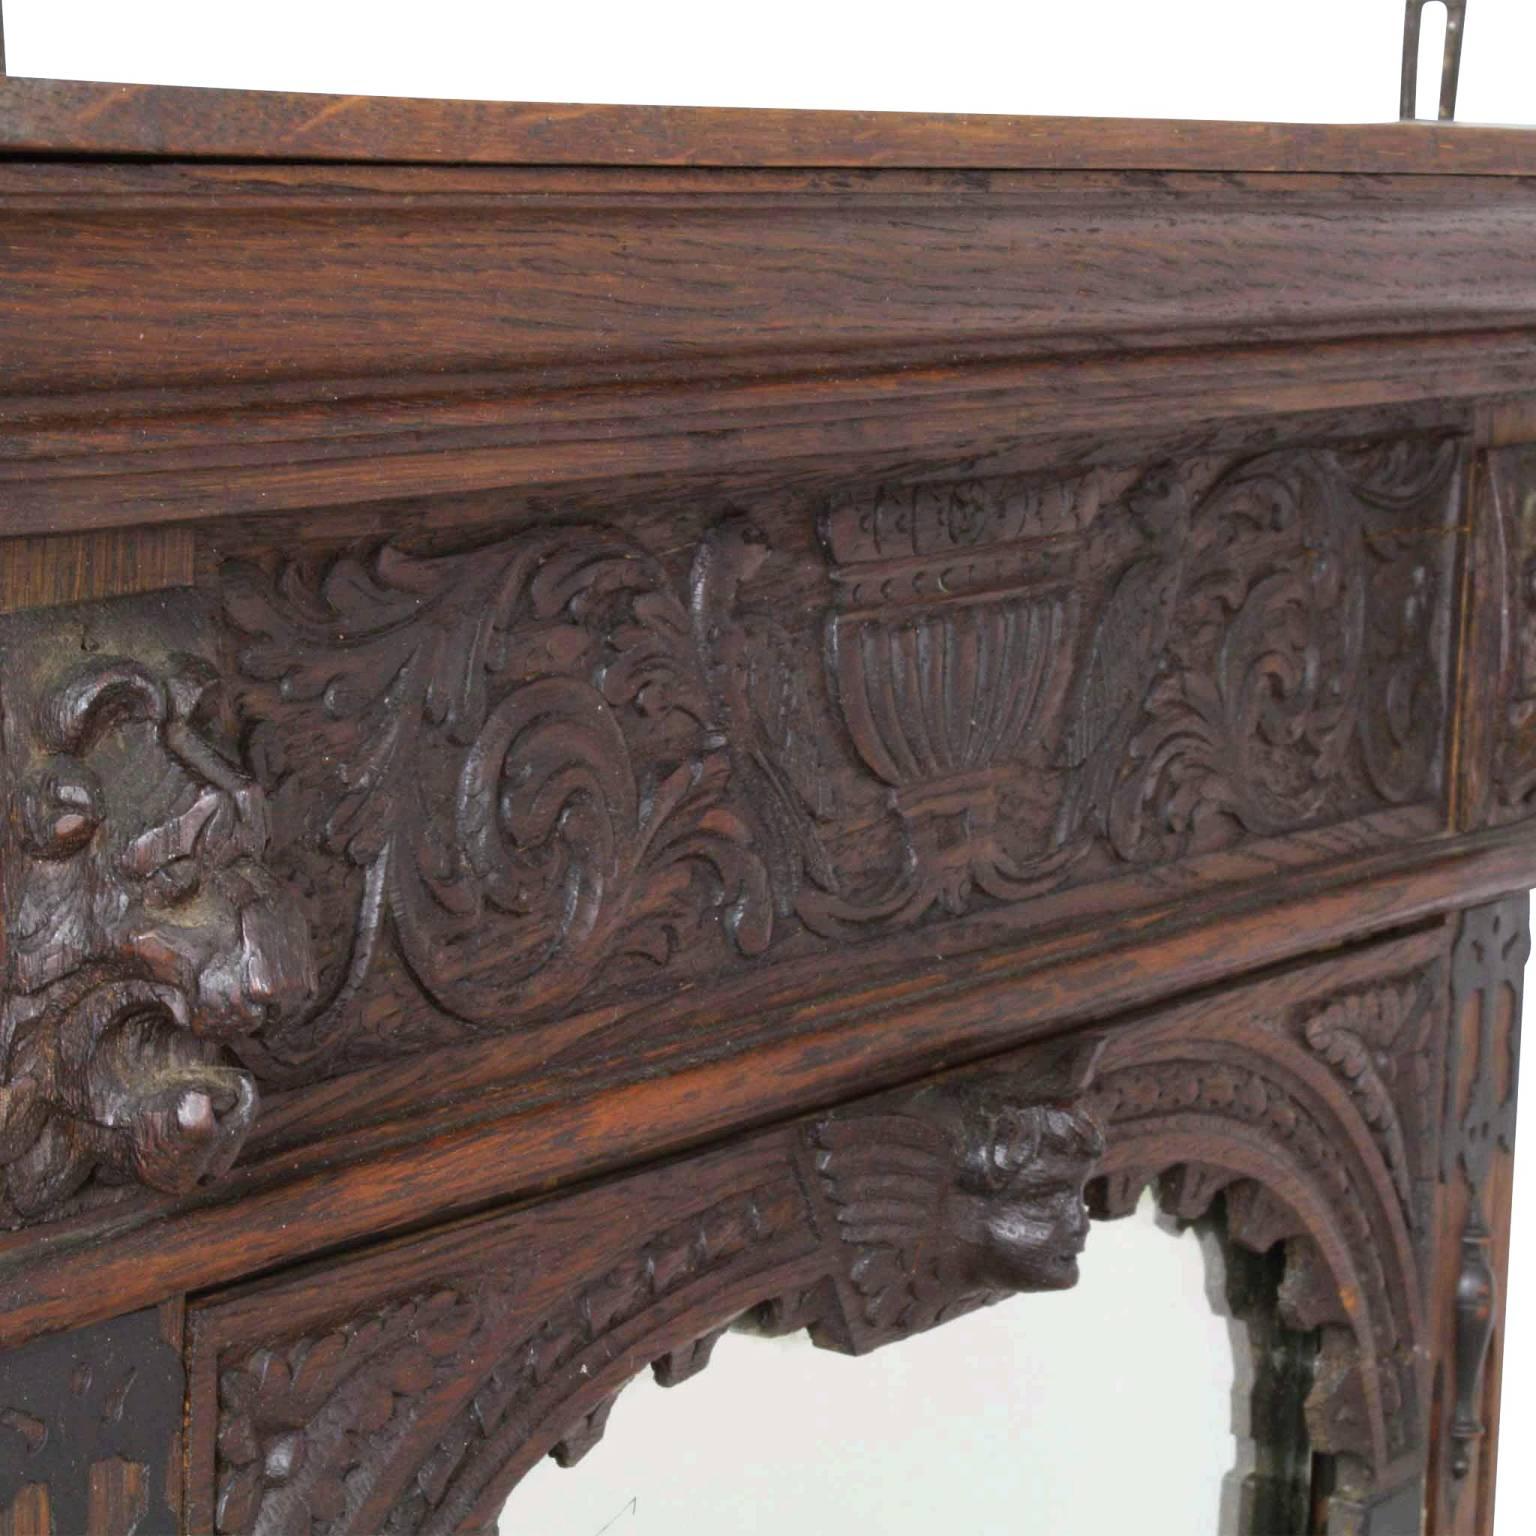 Features nicely carved lion’s heads and urn with ivy under the crown, as well as a cherub’s head with wings. While intricate, this piece has a more toned down feel than many of the typical pieces in this style. Complete with shelf and small storage